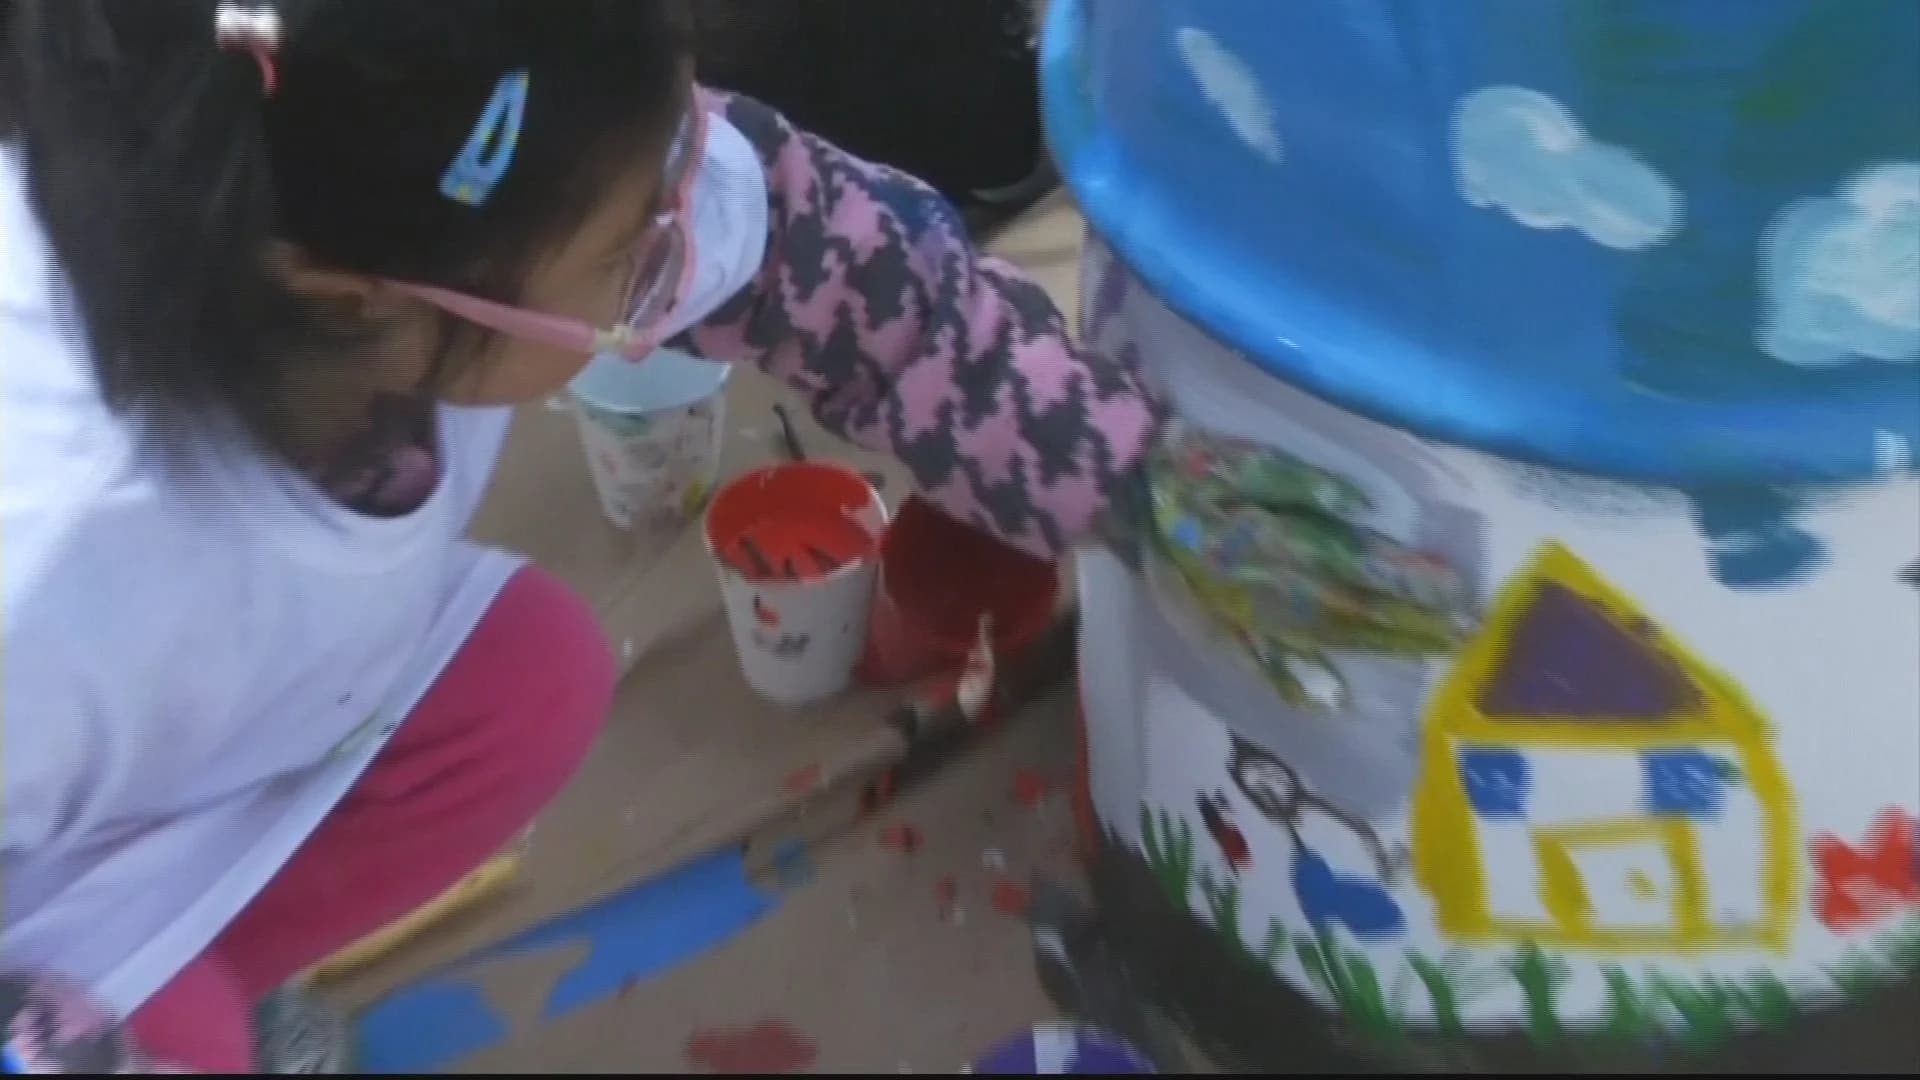 Community members decorate trash cans on Coney Island